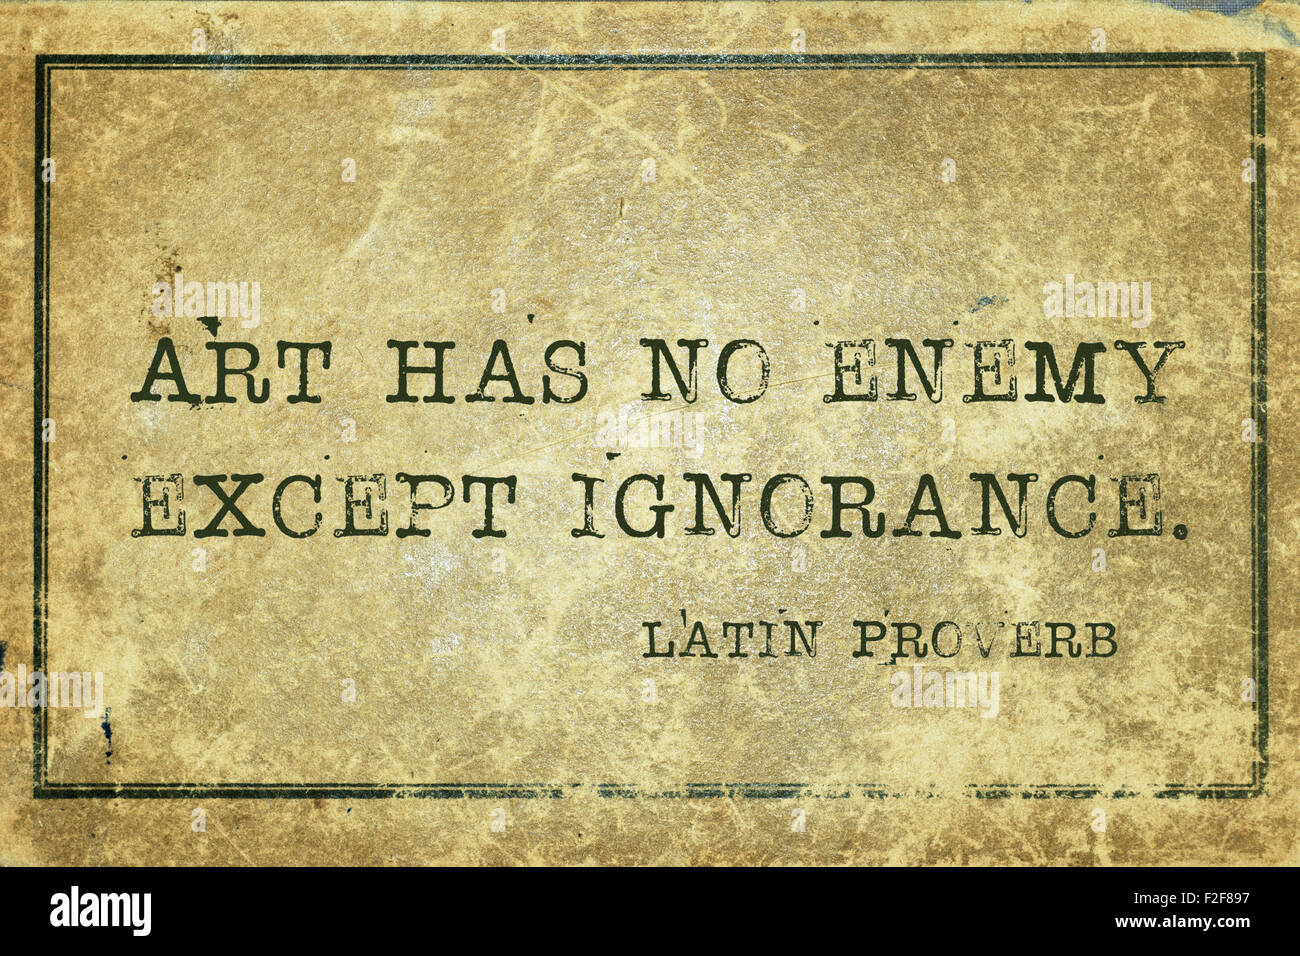 Art has no enemy except ignorance - ancient Latin proverb printed on grunge vintage cardboard Stock Photo